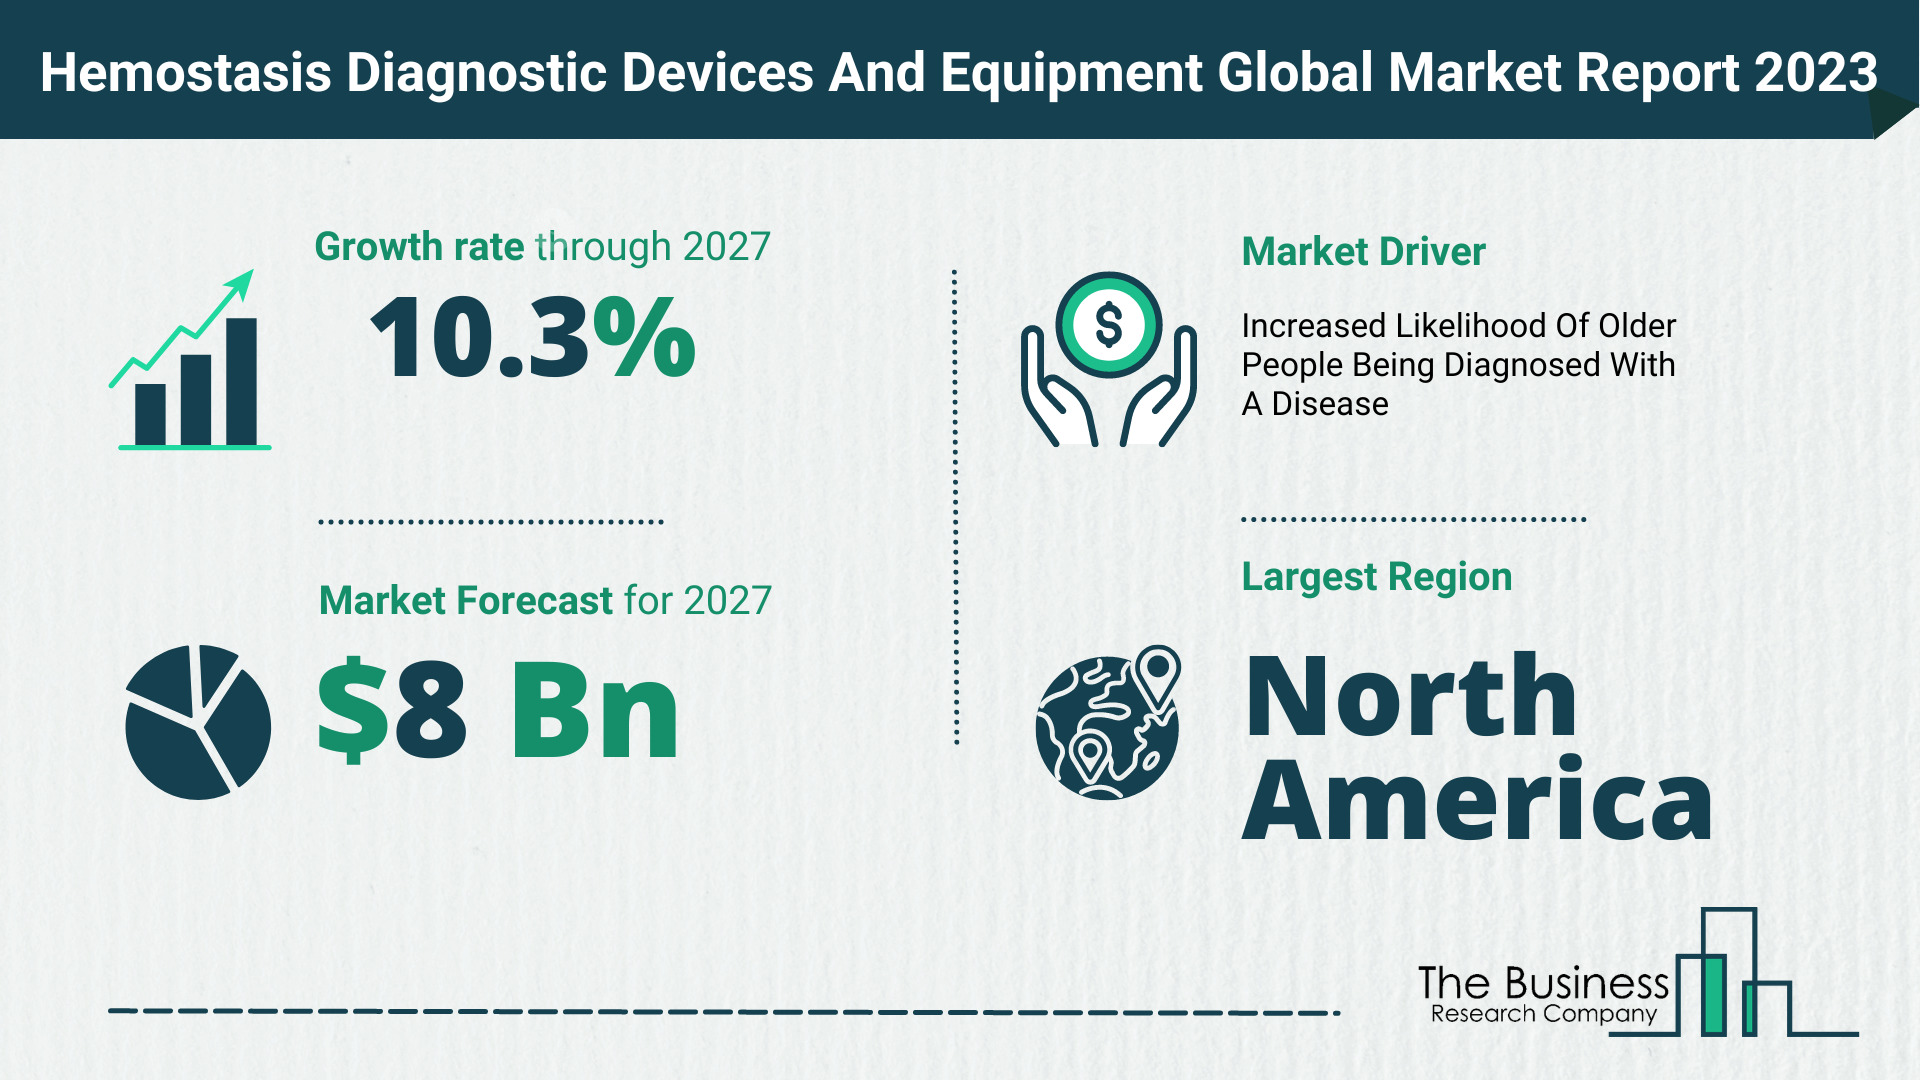 What Will The Hemostasis Diagnostic Devices And Equipment Market Look Like In 2023?